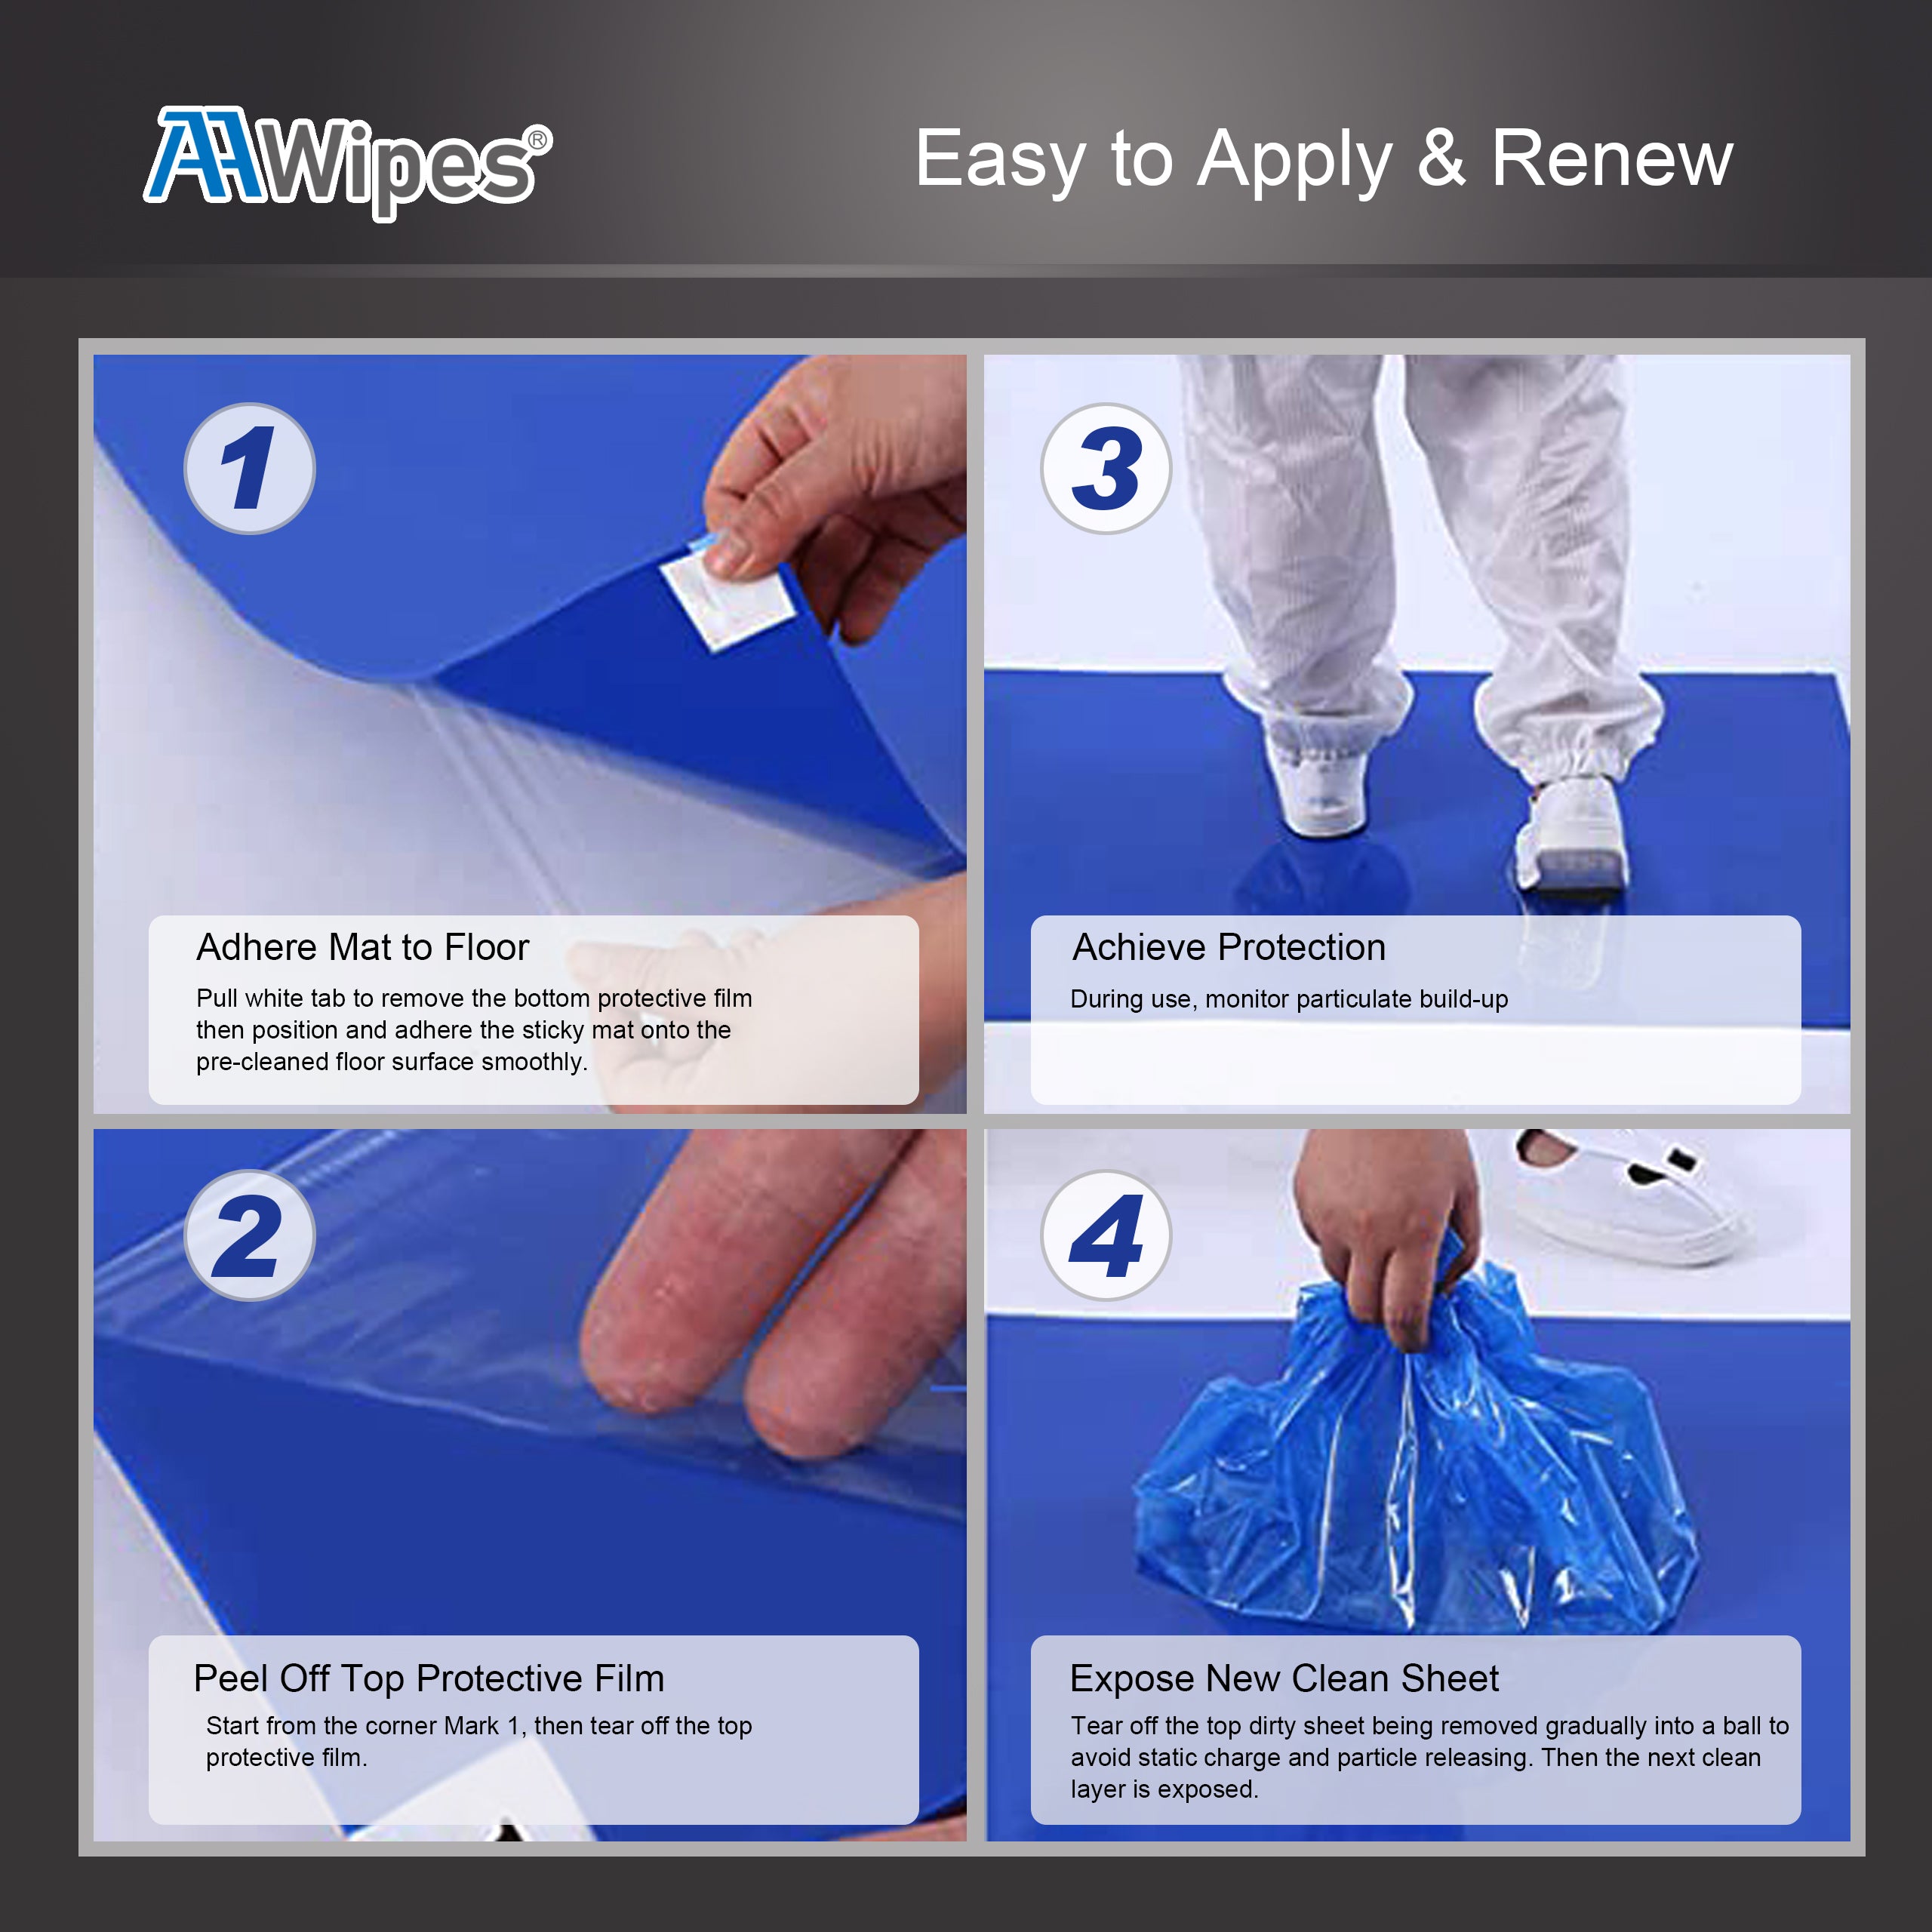  AAwipes cleanroom adhesive/tacky/sticky mats are made of premium PVC film coated with Eco-friendly water-based adhesive. They are 0.5 micrometers thicker than normal sticky mats so they are more effective particle reducing surface to reduce traffic-borne contaminants. Easy to remove the dust, dirt, and small debris.